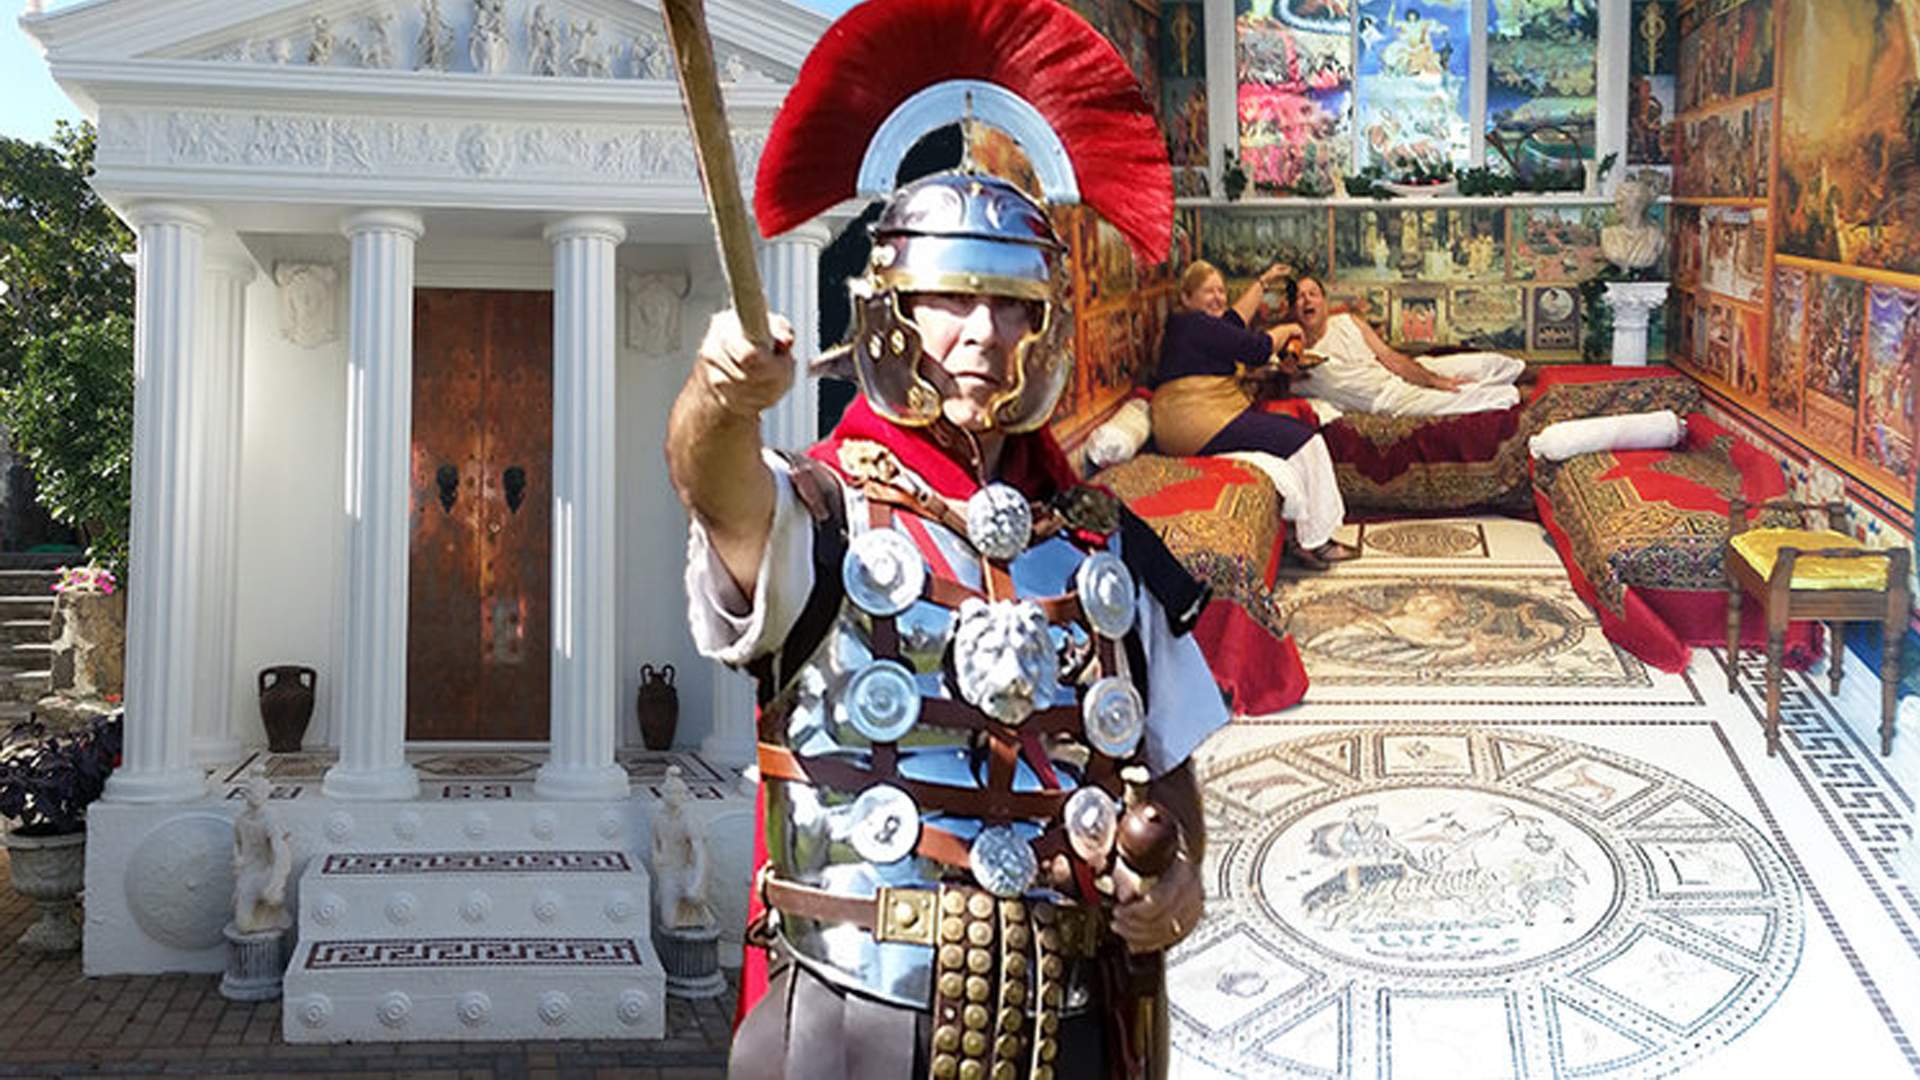 Caesar's Rome: Hands-On Living History Experience